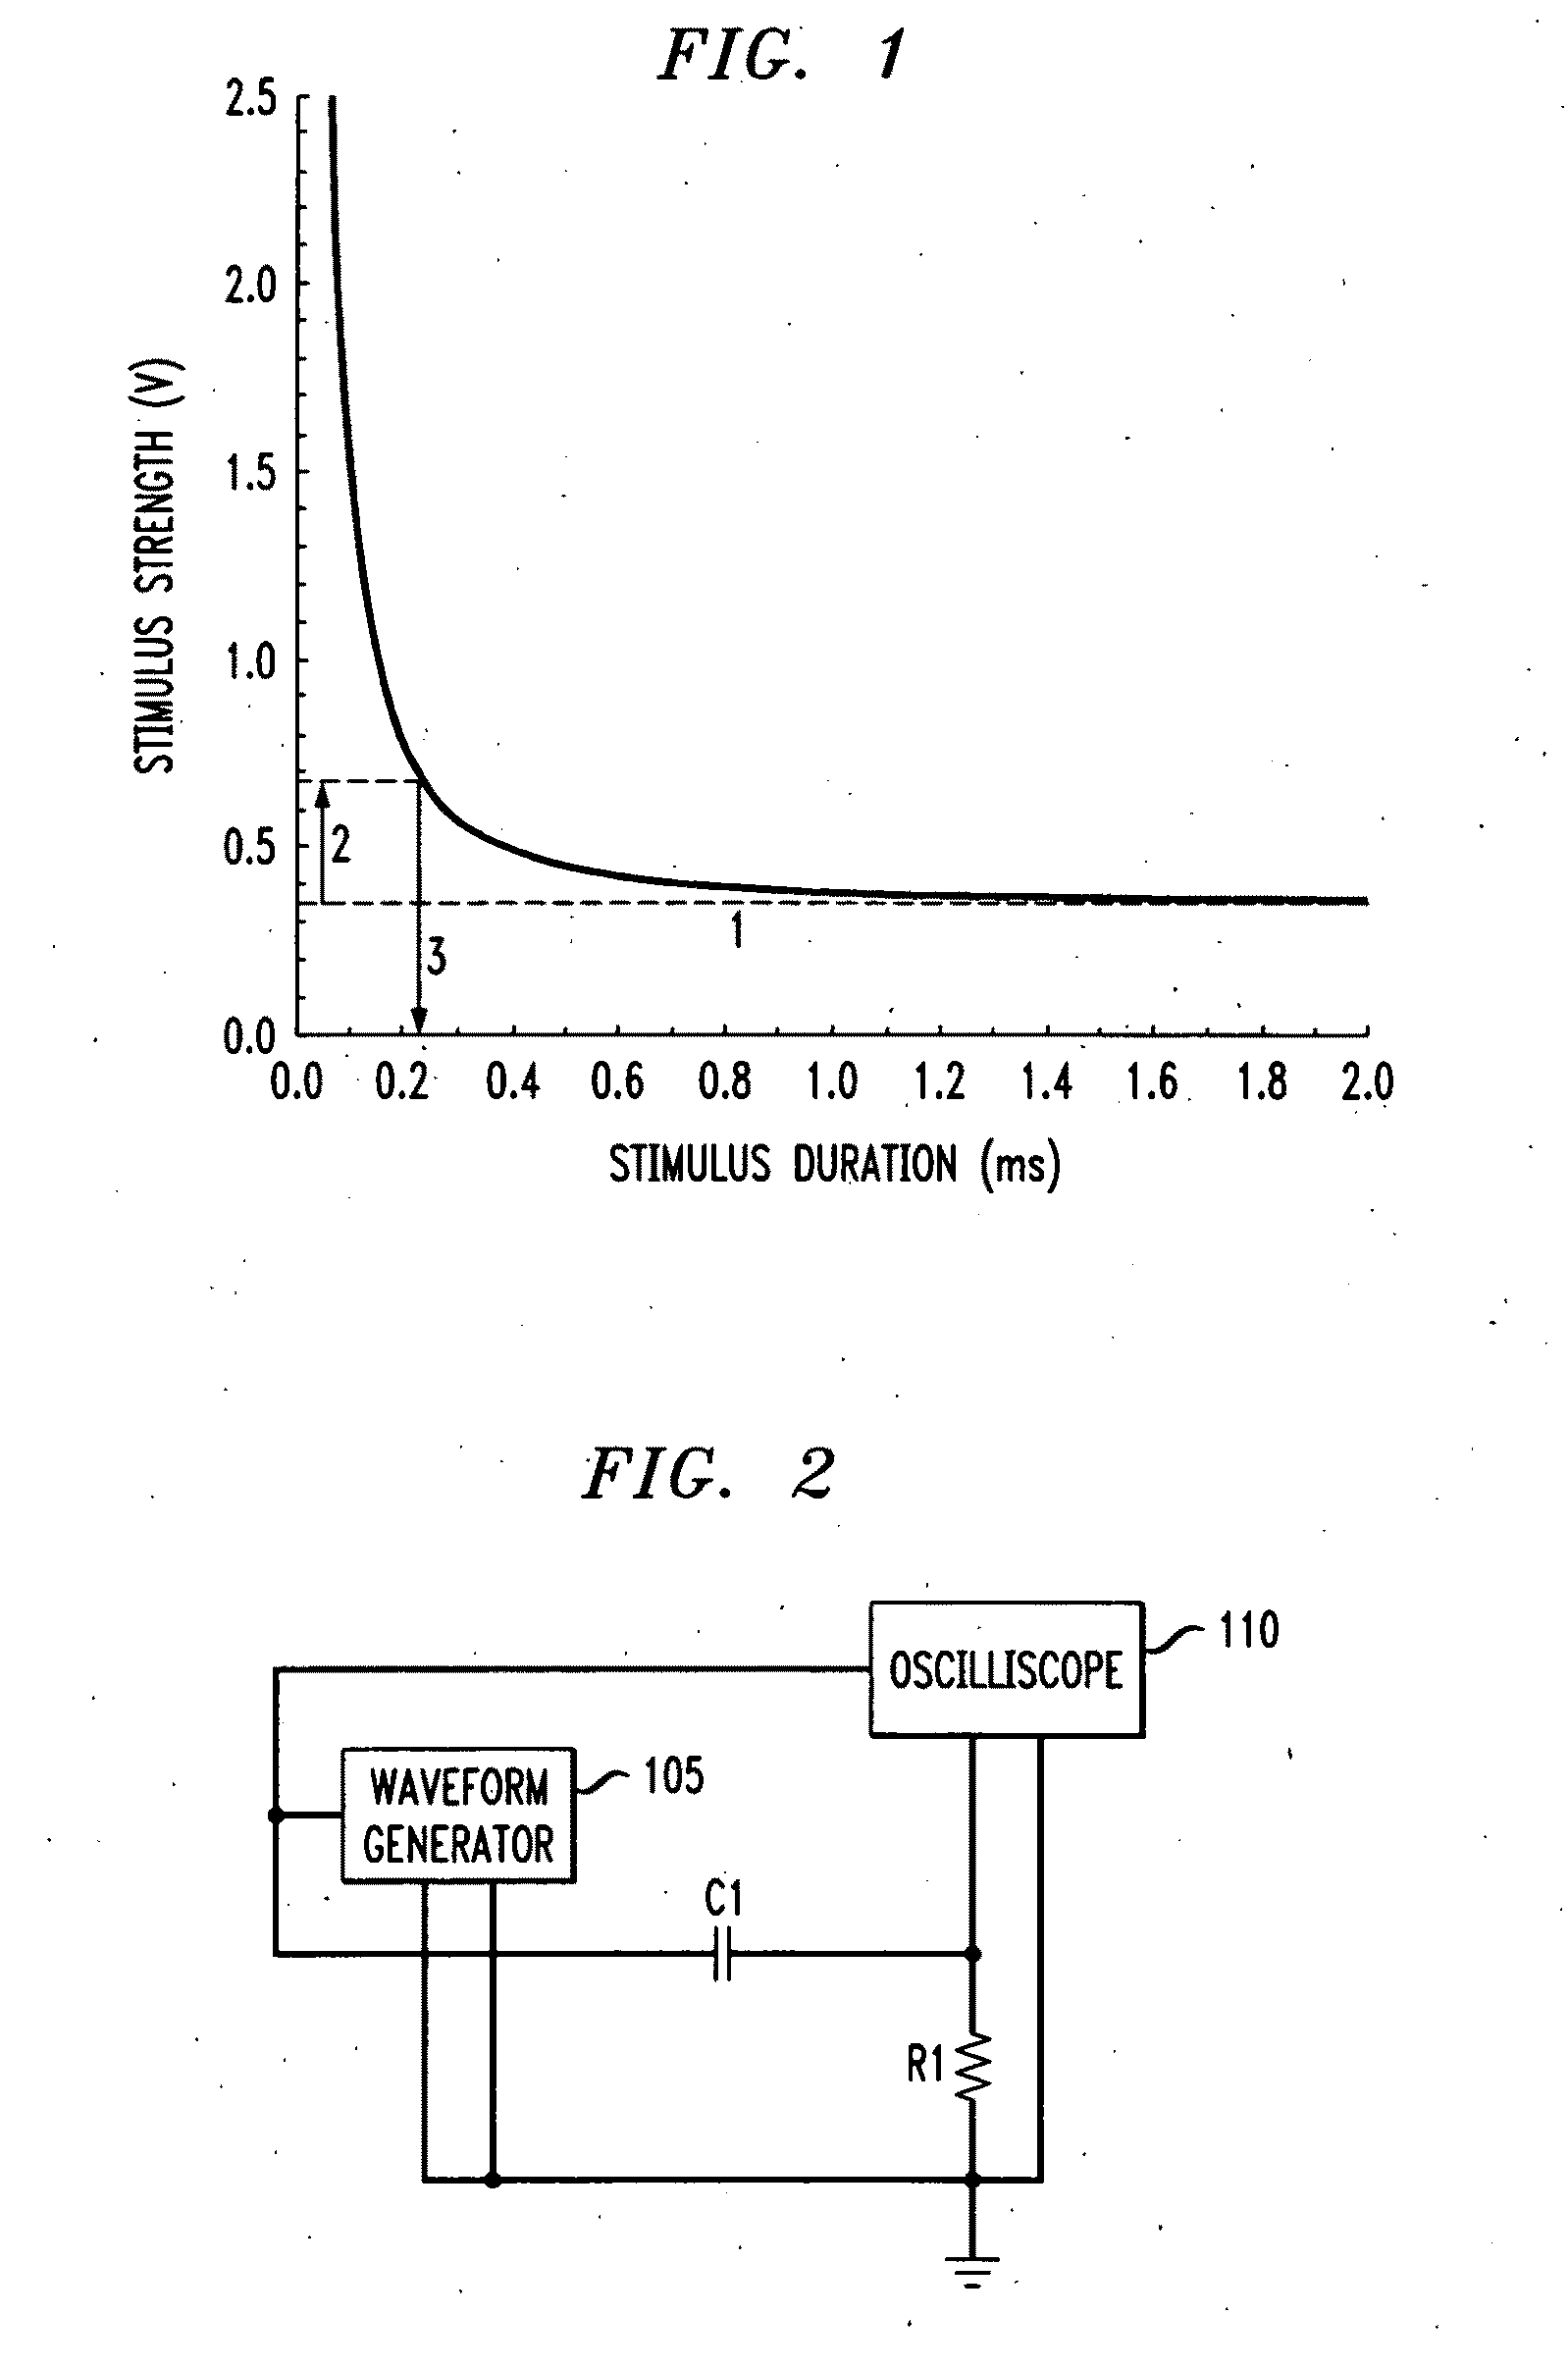 Optimizing the stimulus current in a surface based stimulation device